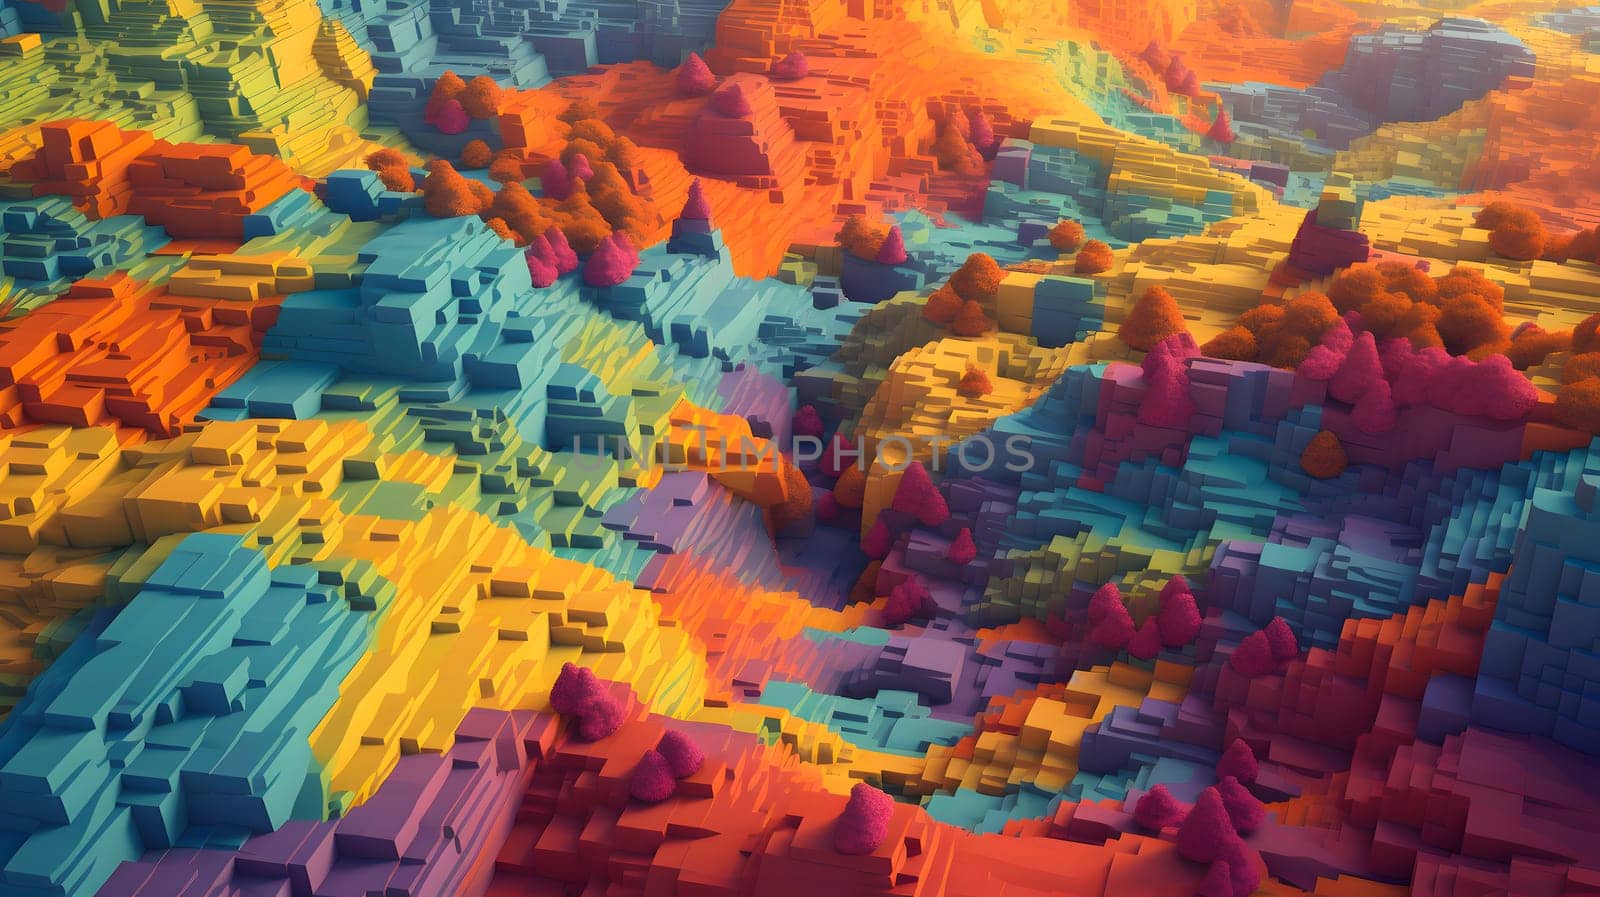 abstract topographic landscape model based on small colorful cubes, neural network generated art by z1b